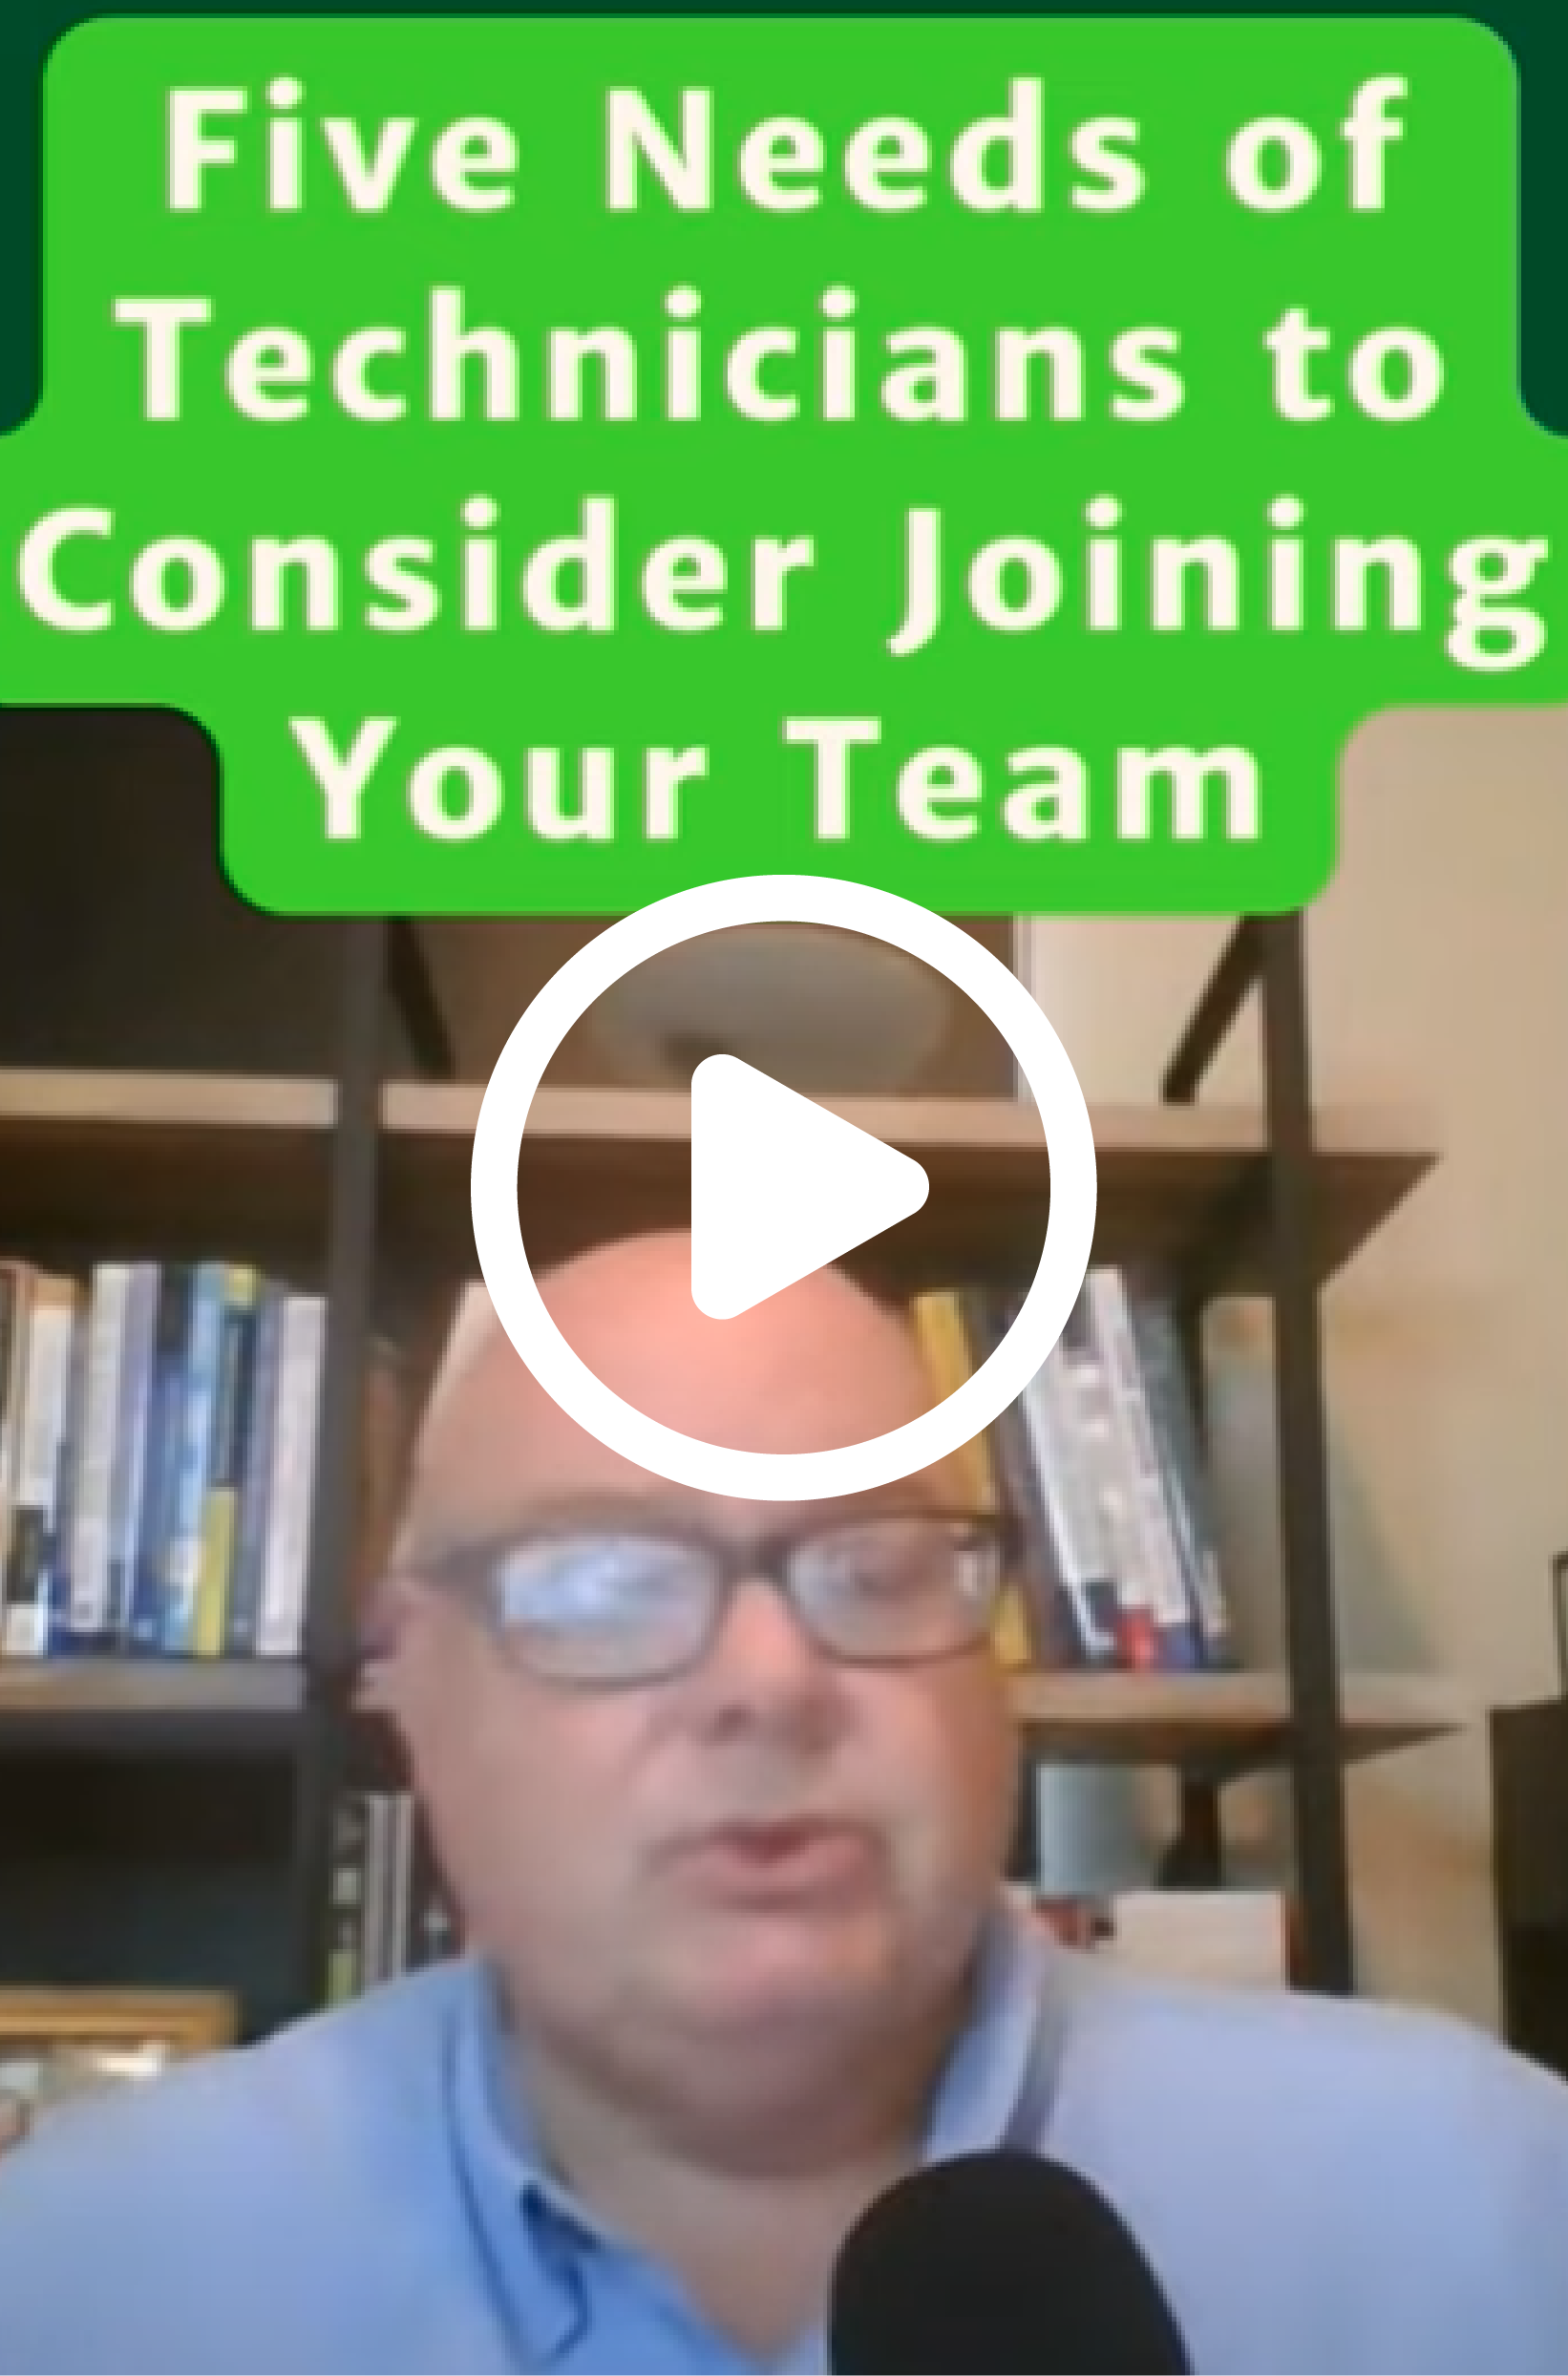 Play Video: 5 Needs of Technicians to Consider Joining Your Team